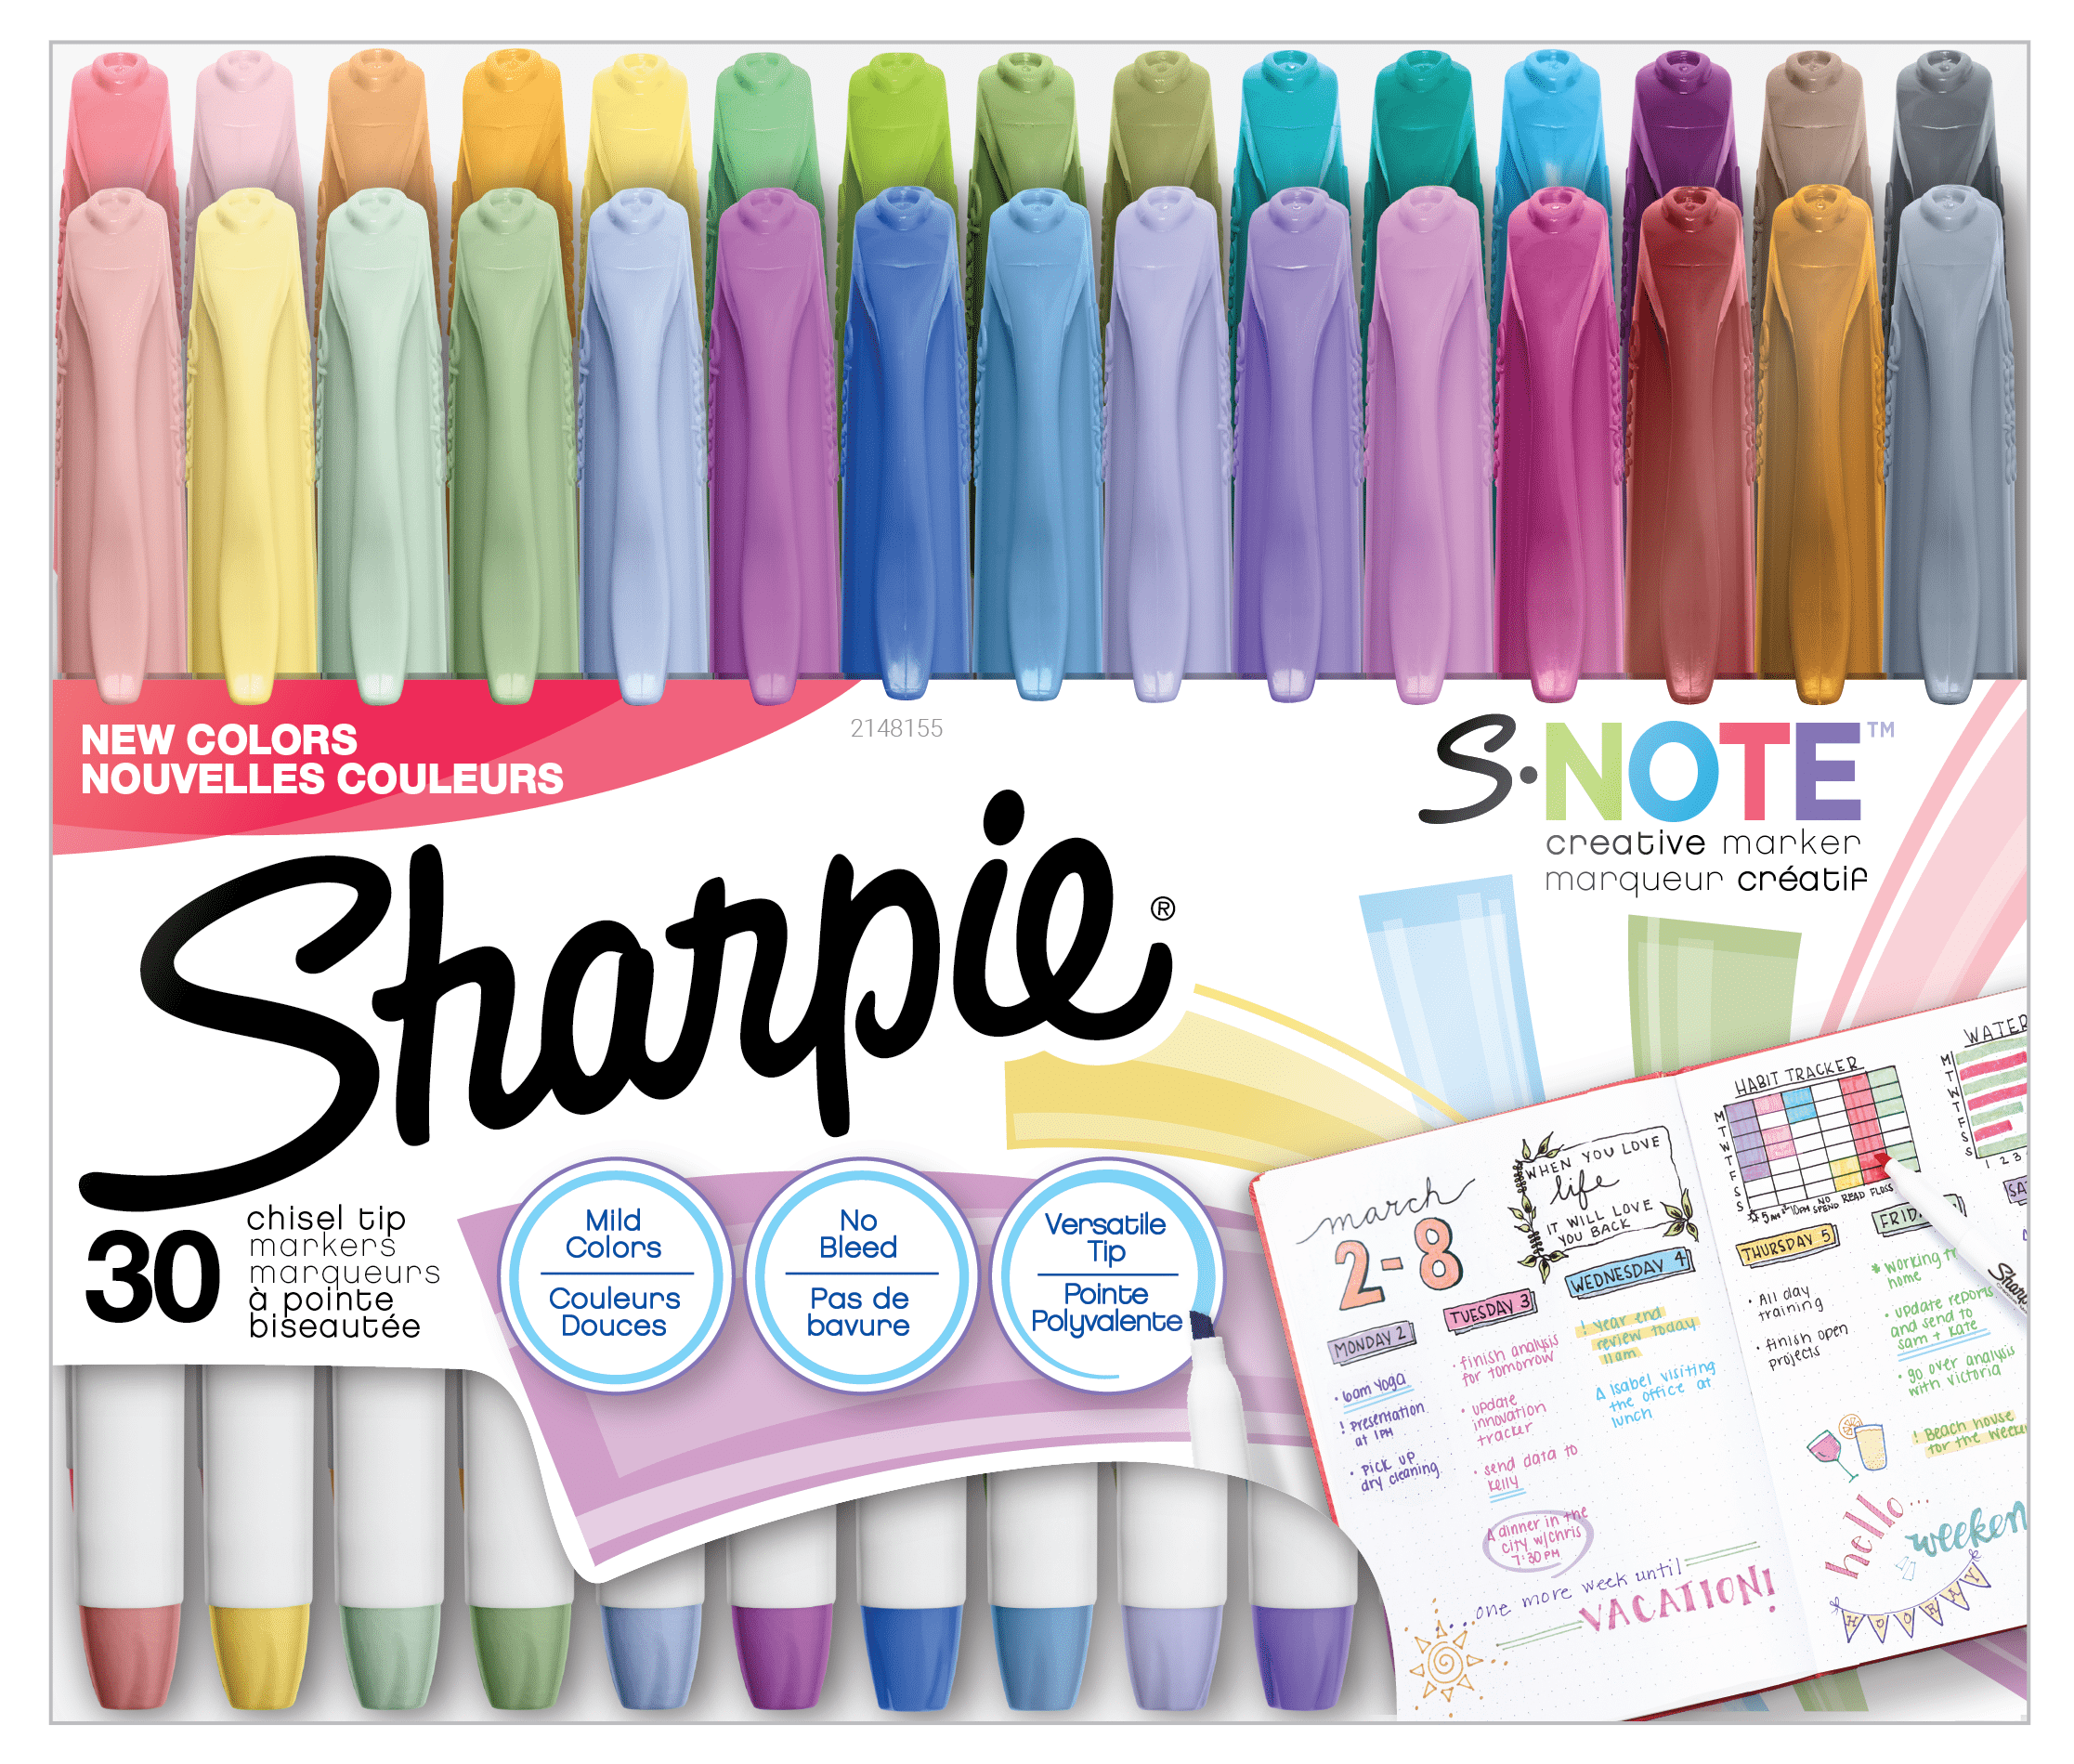 Sharpie S-Note Creative Markers, Highlighters, Assorted Colors, Chisel Tip, 30 Count